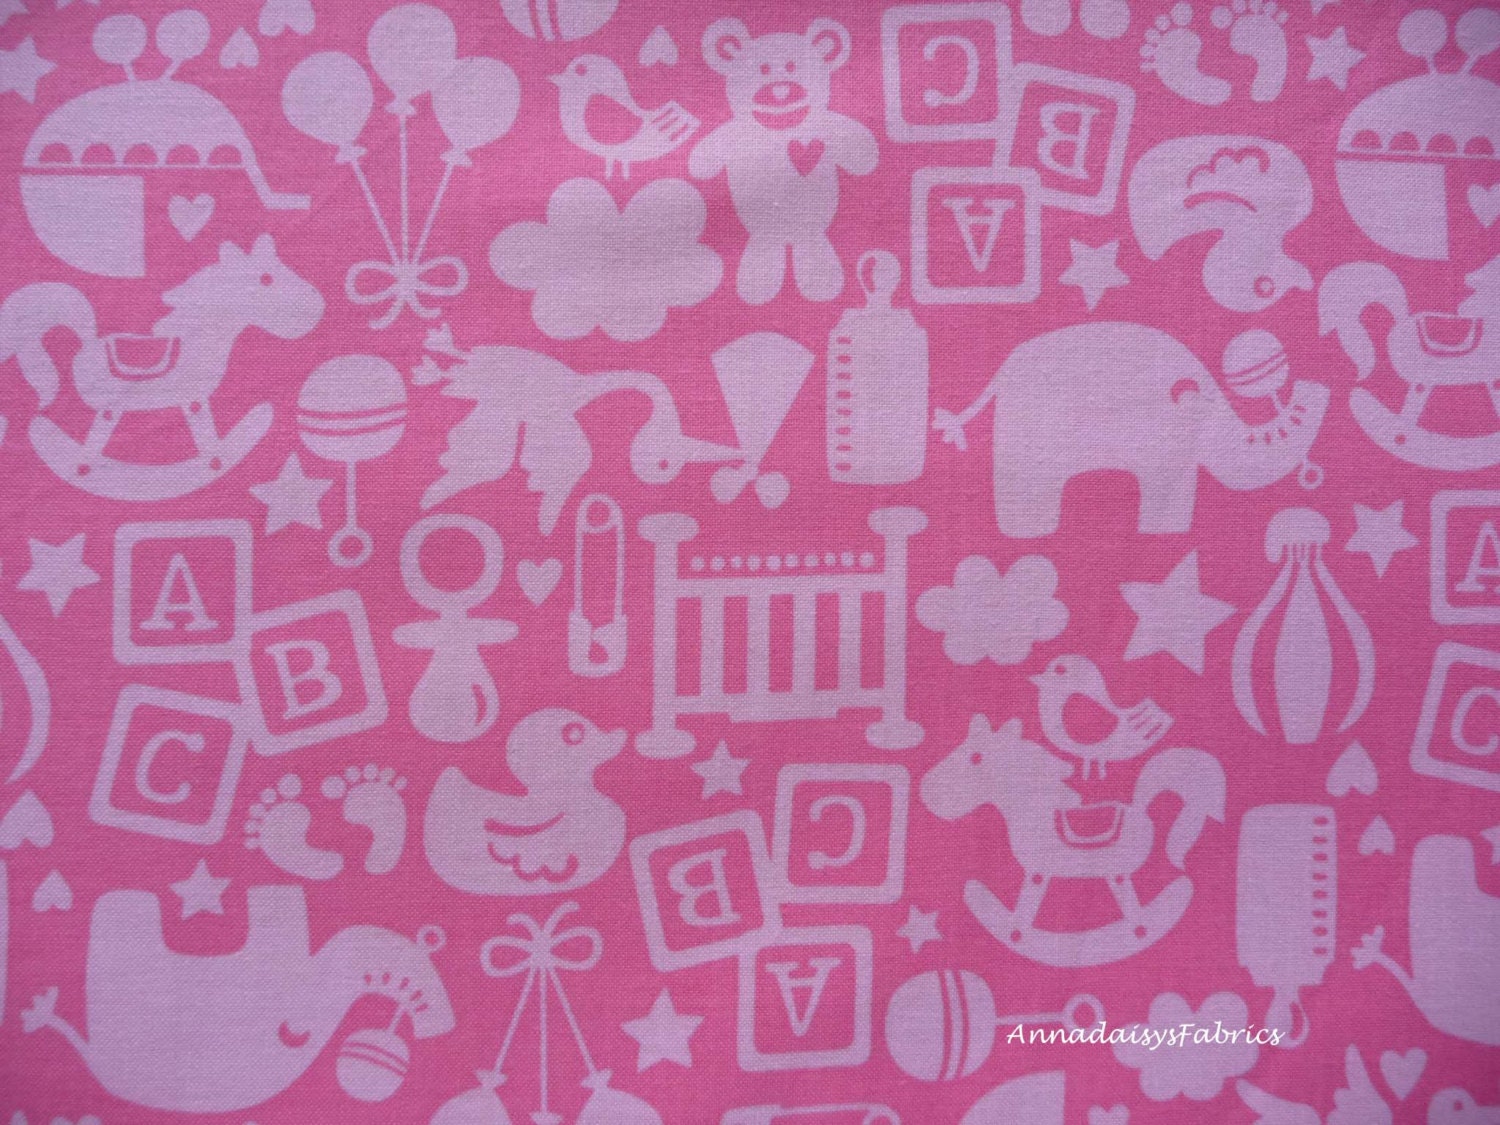 Pink Baby Fabric, Blend Fabrics, Alfie & Bettie Toy Pink, Maude Asbury 101.110.05.1, Toys, Quilt Fabric By The Yard, Cotton